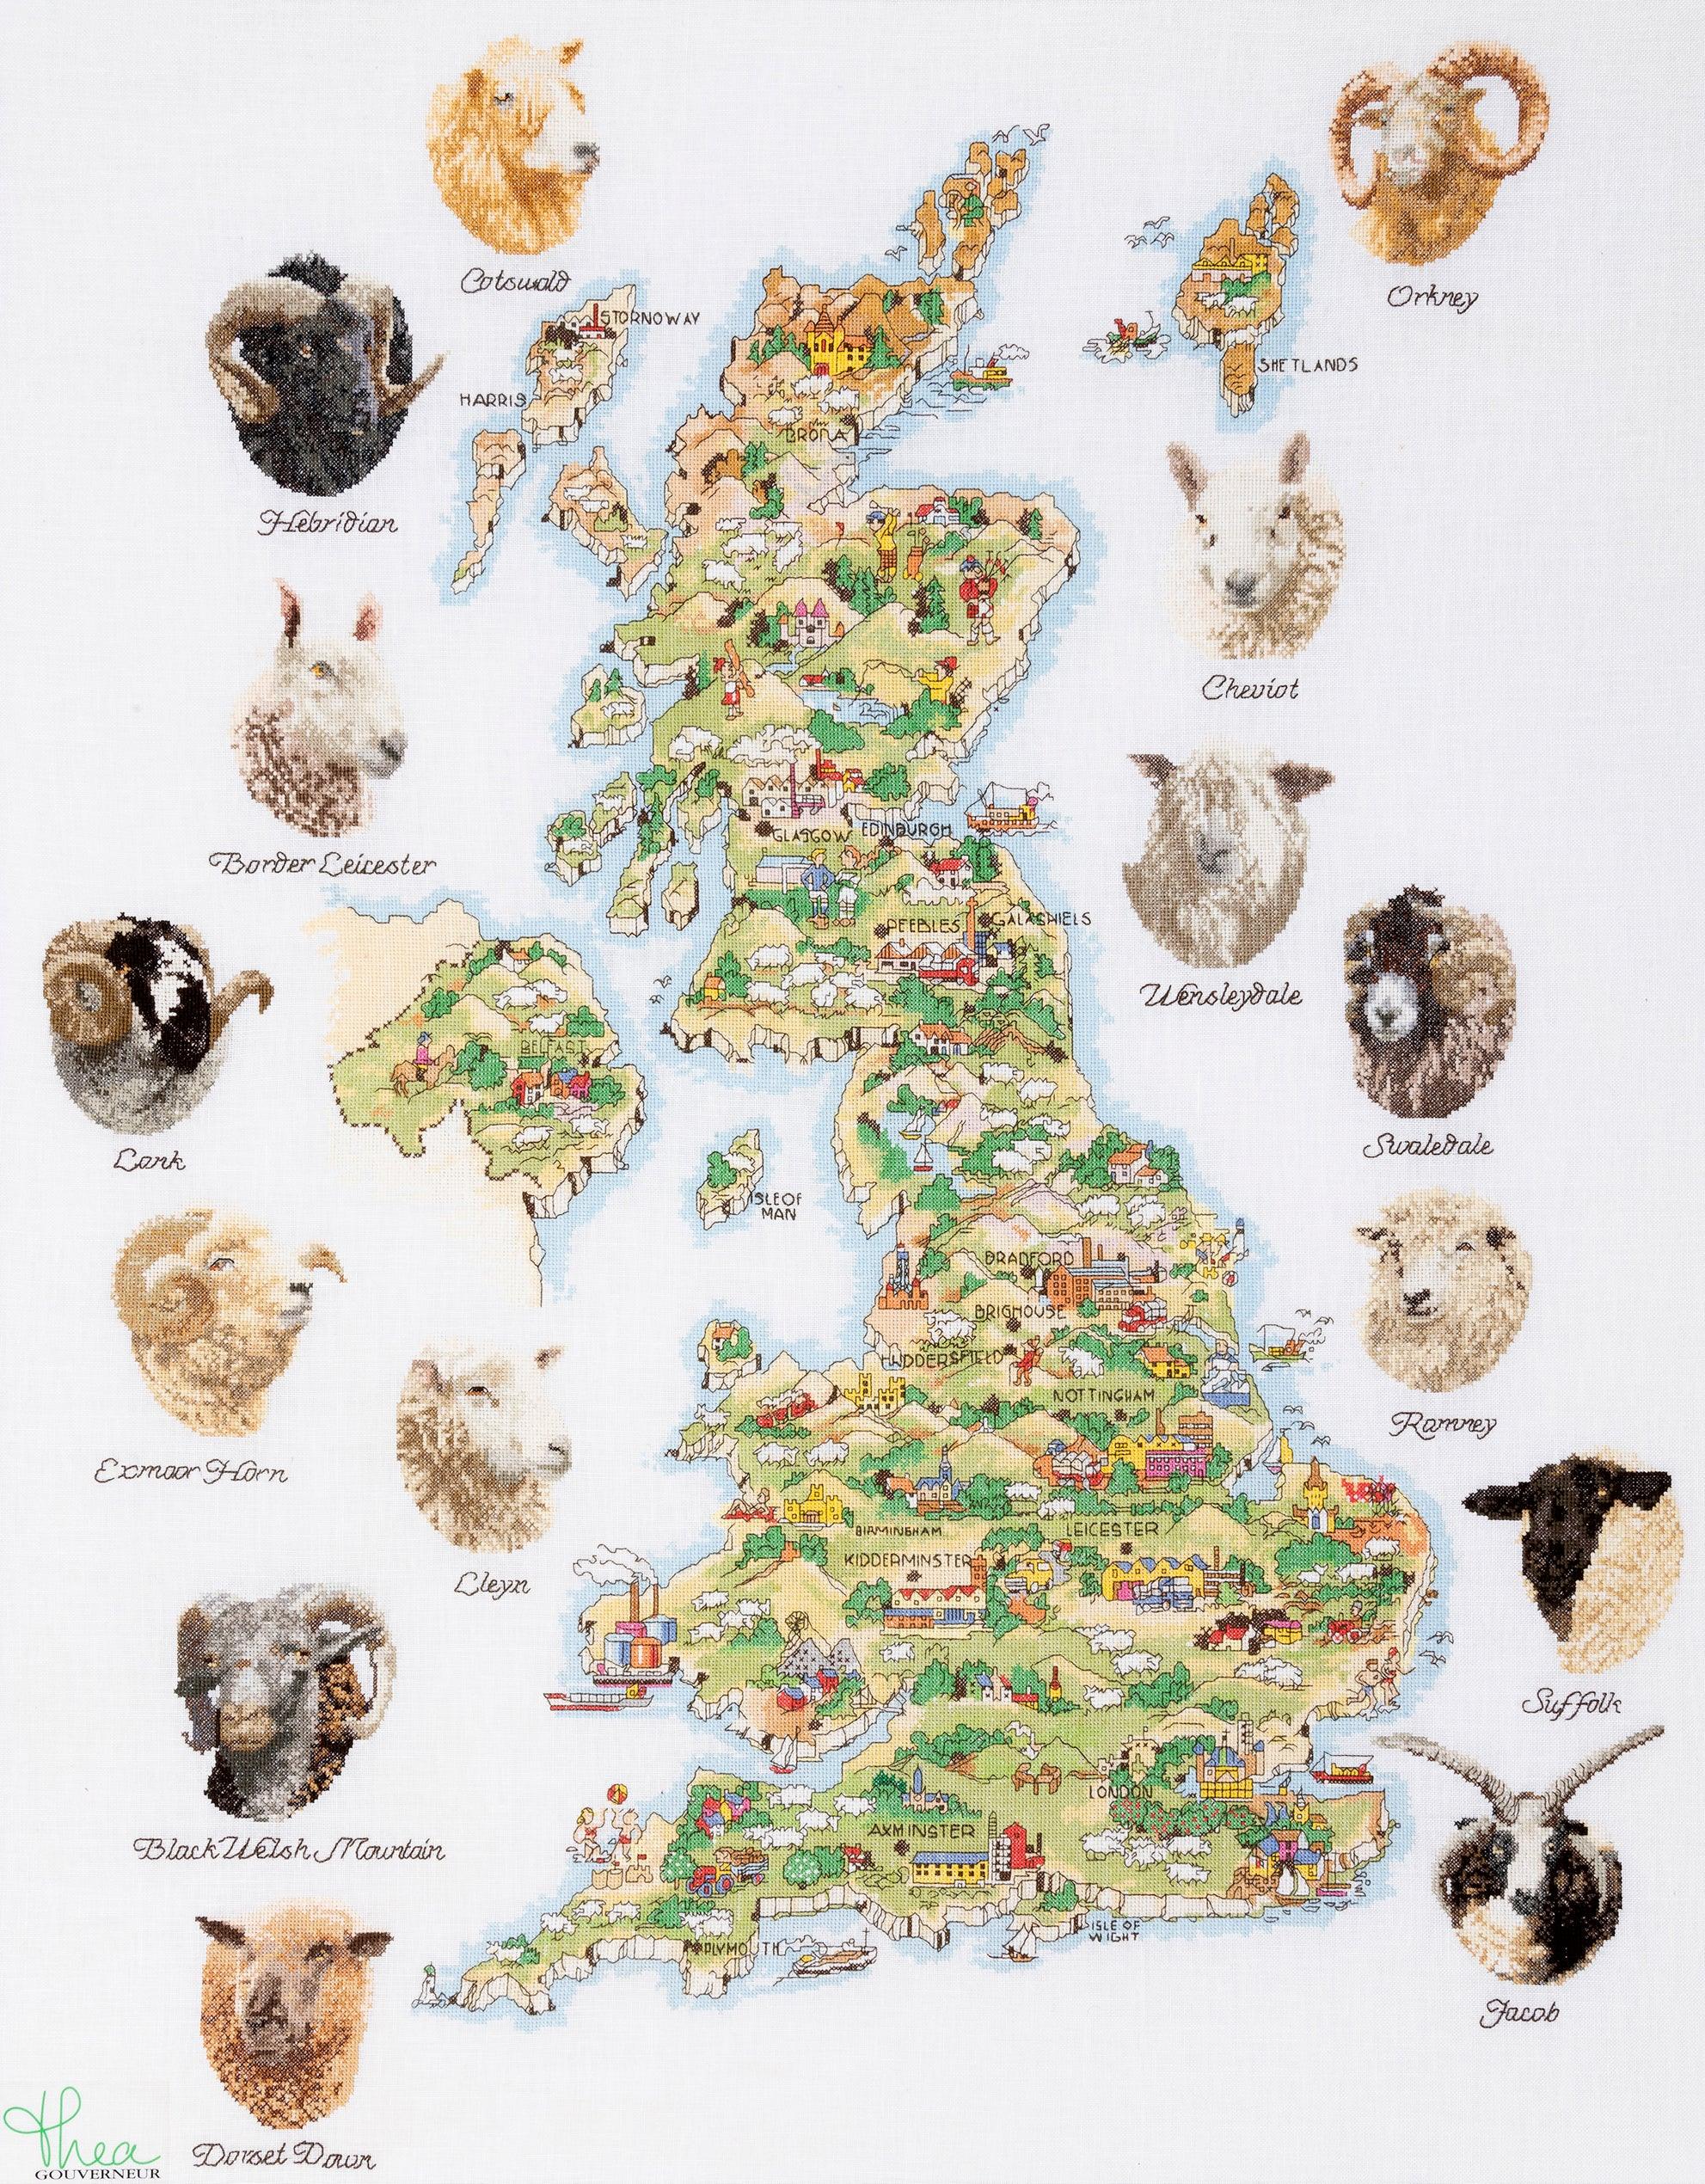 Thea Gouverneur - Counted Cross Stitch Kit - Sheep Map Of Great Britain - Linen - 36 count - 1076 - Thea Gouverneur Since 1959